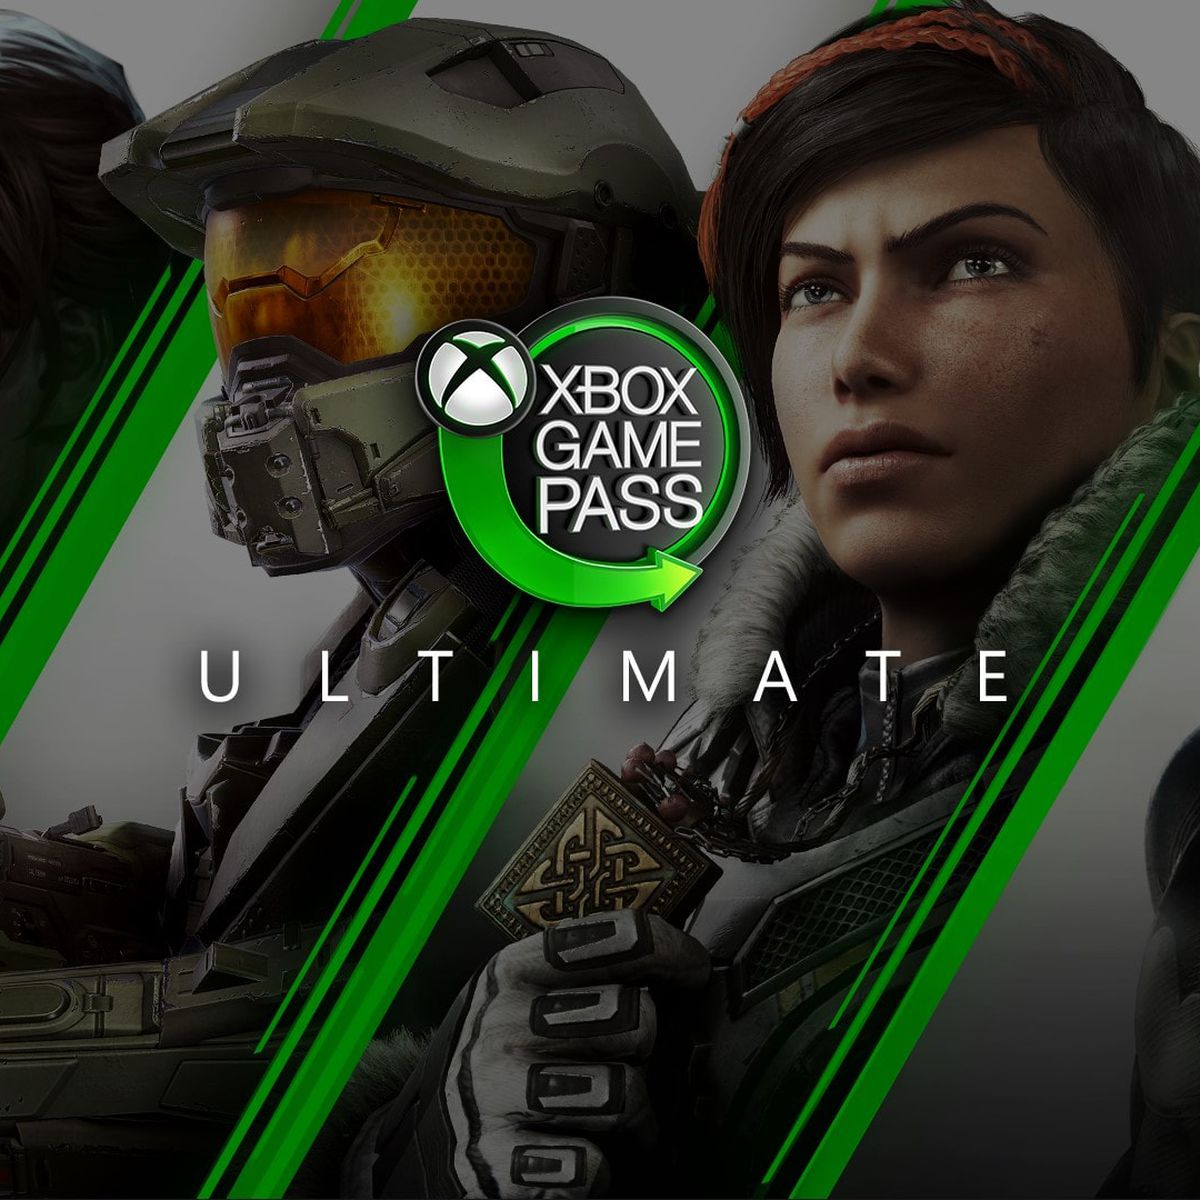 Xbox Game Pass Ultimate logo